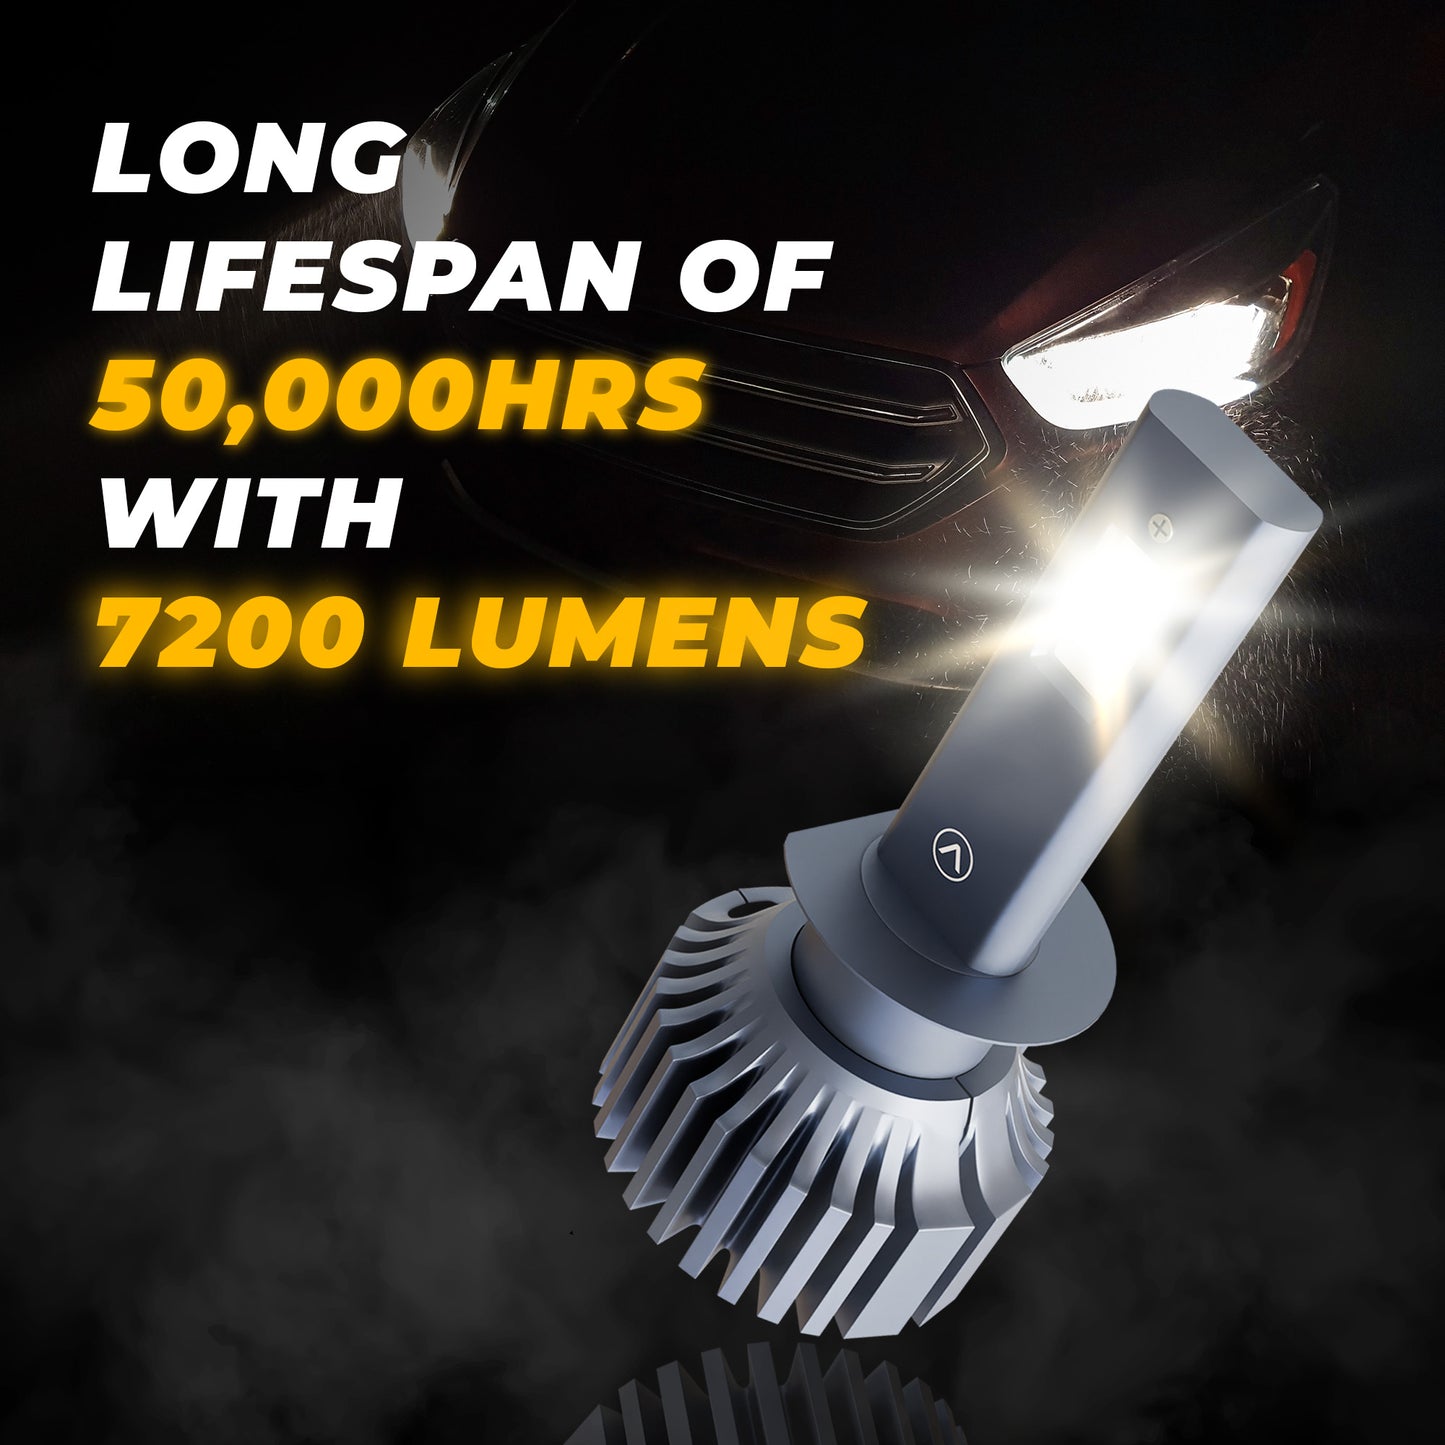 JCBL ACCESSORIES Lumenz H1 90W Car Headlight LED Bulb, 7200 Lumens Dual-Beam, 6000-6500K Day Light, Weather-Resistant IP67 Waterproof | LONG LIFESPAN of 50,000HRS With 7200 LUMENS